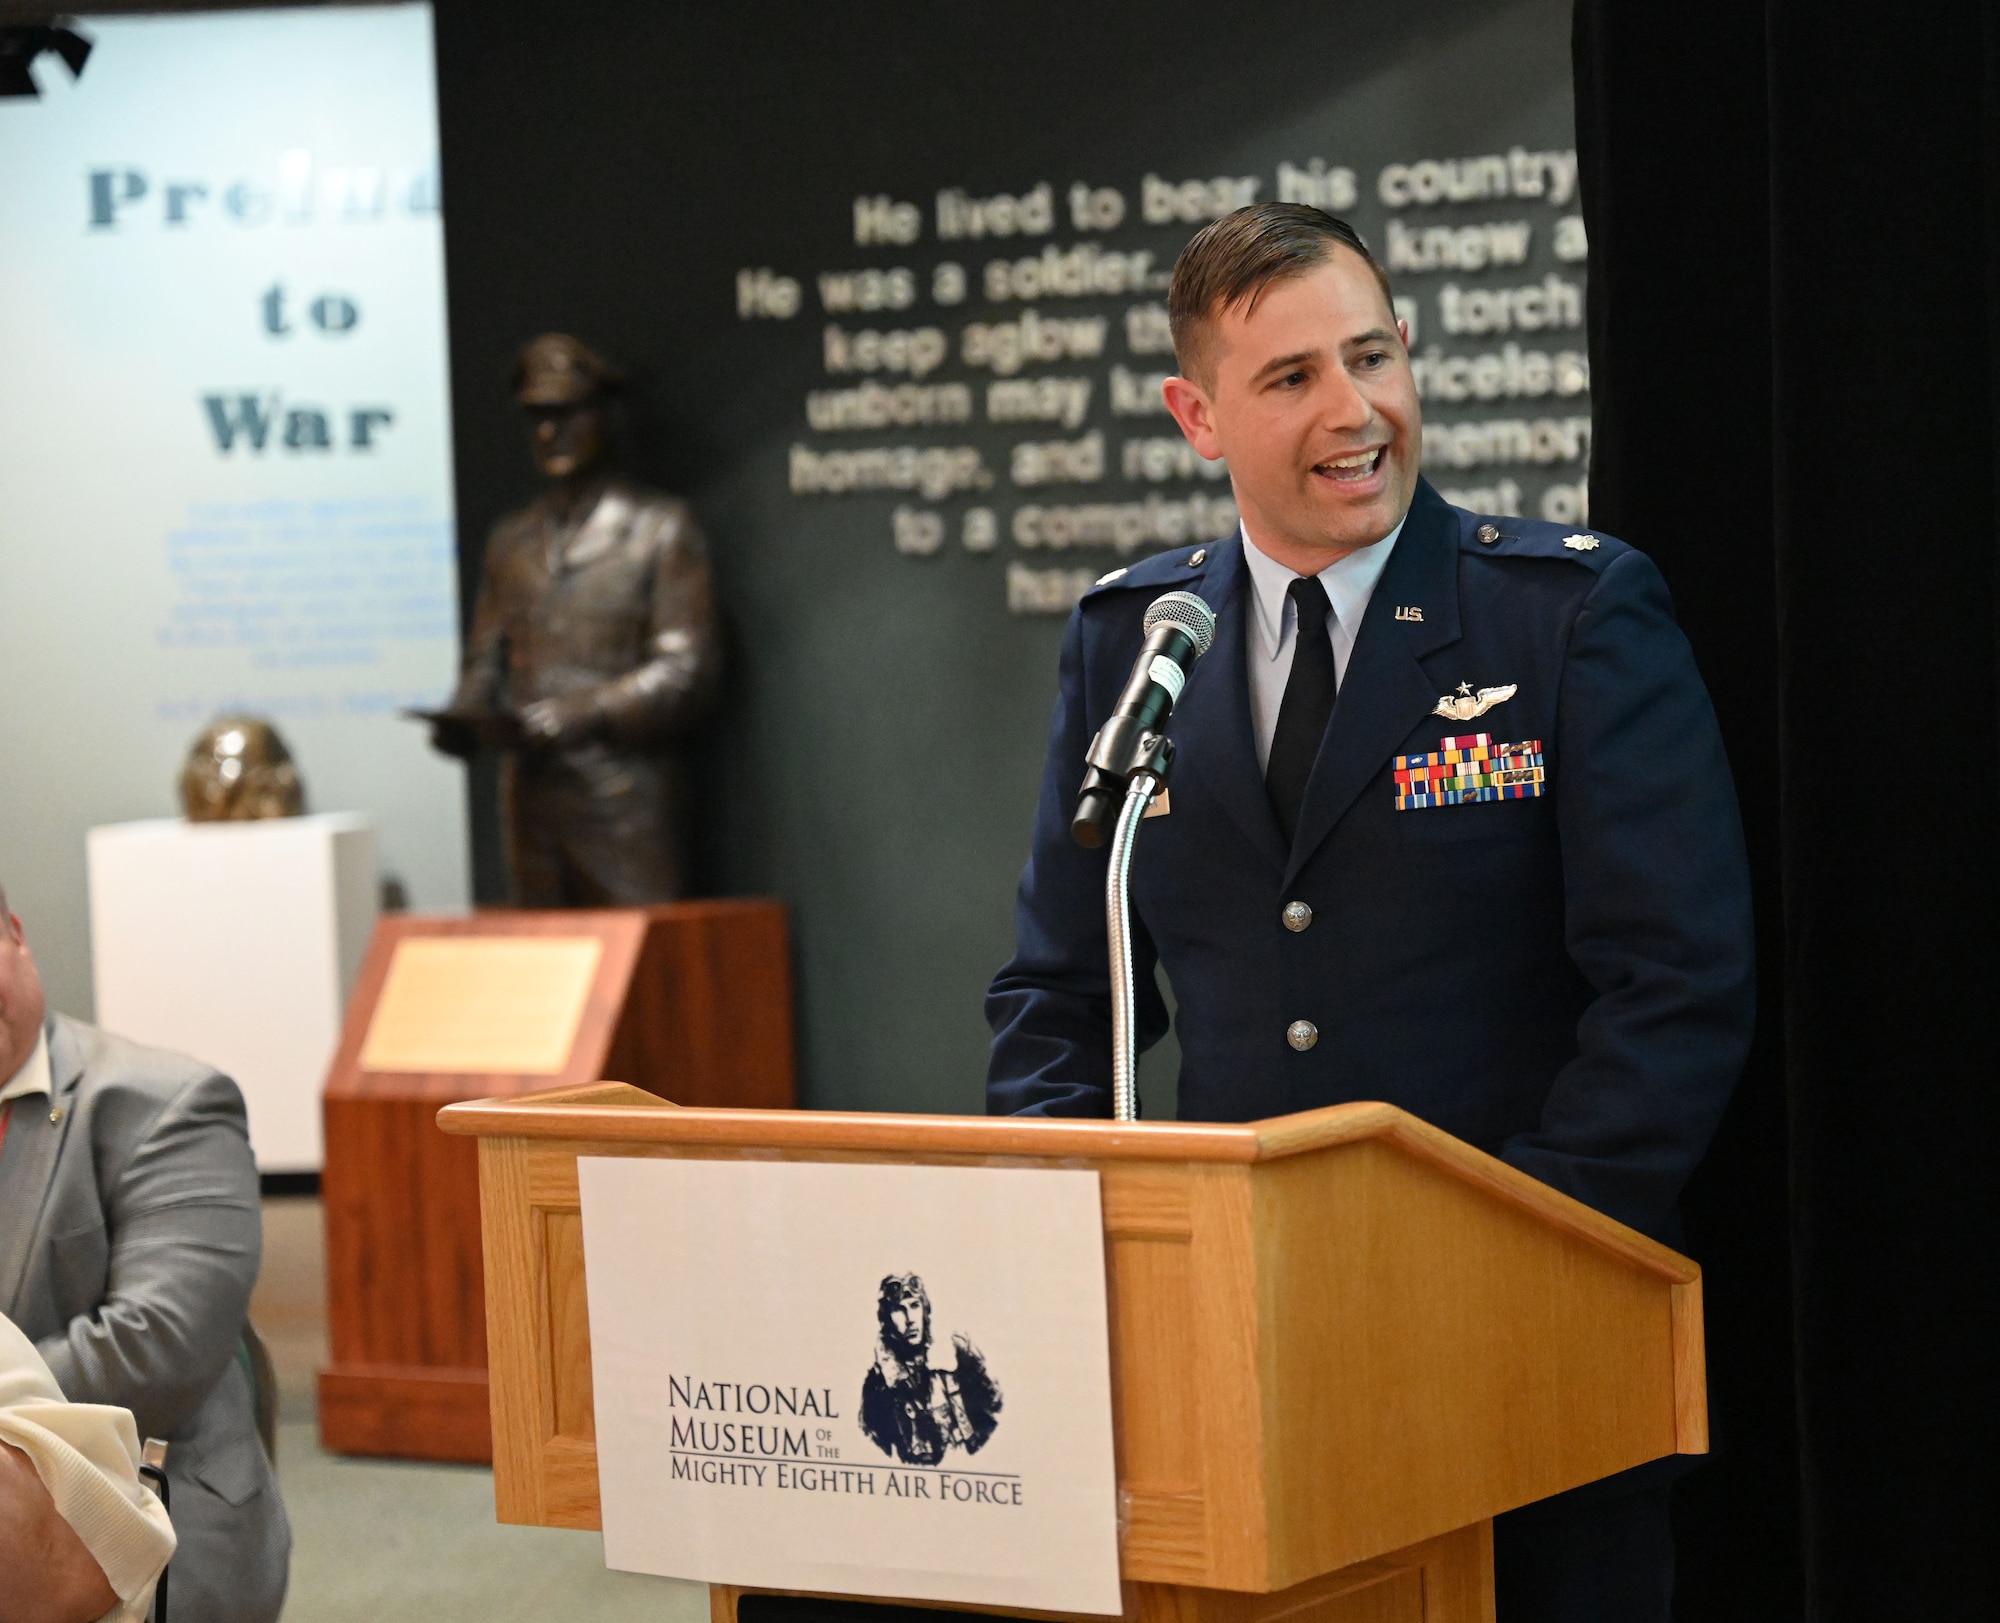 U.S. Air Force Lt. Col. Ryan Chamberlin, 100th Operations Support Squadron assistant director of operations and KC-135 Stratotanker instructor pilot, talks about the historic relationship between the 100th Bomb Group and 100th Air Refueling Wing at the 100th BG reunion banquet at the National Museum of the Mighty Eighth Air Force in Savannah, Georgia, May 27, 2023. Airmen from the 100th ARW attended the reunion to meet veterans and their families, and learn more about the heritage of their wing. (U.S. Air Force photo by Karen Abeyasekere)